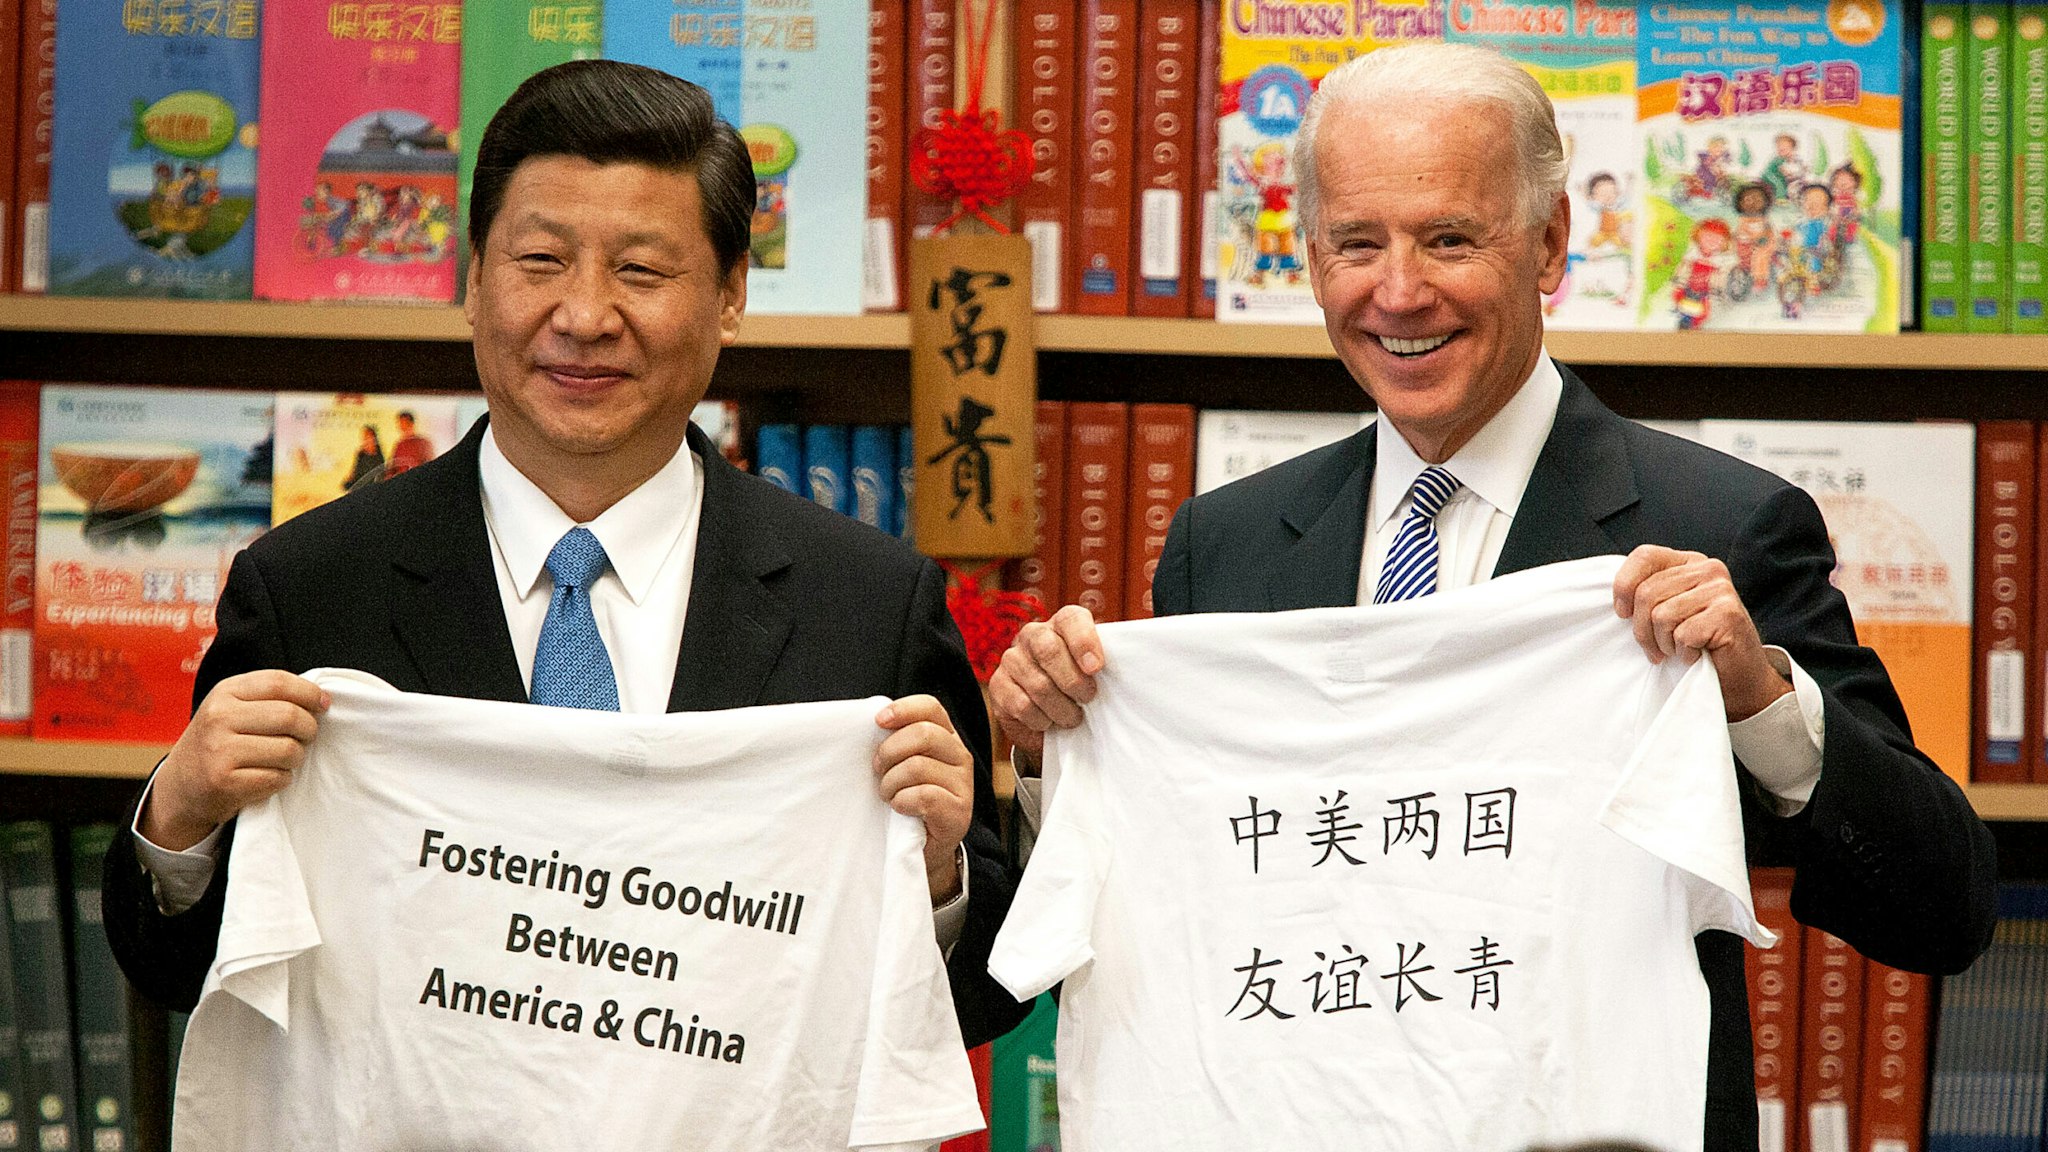 Xi Jinping, vice president of China, left, and U.S. Vice President Joe Biden stand for a photograph while visiting the International Studies Learning Center in South Gate, California, U.S., on Friday, Feb. 17, 2012. Xi wraps us his trip to the U.S. today and will fly to Ireland for an official visit and then to Turkey to meet with Minister Recep Tayyip Erdogan in Ankara on Feb. 21 before returning to China.